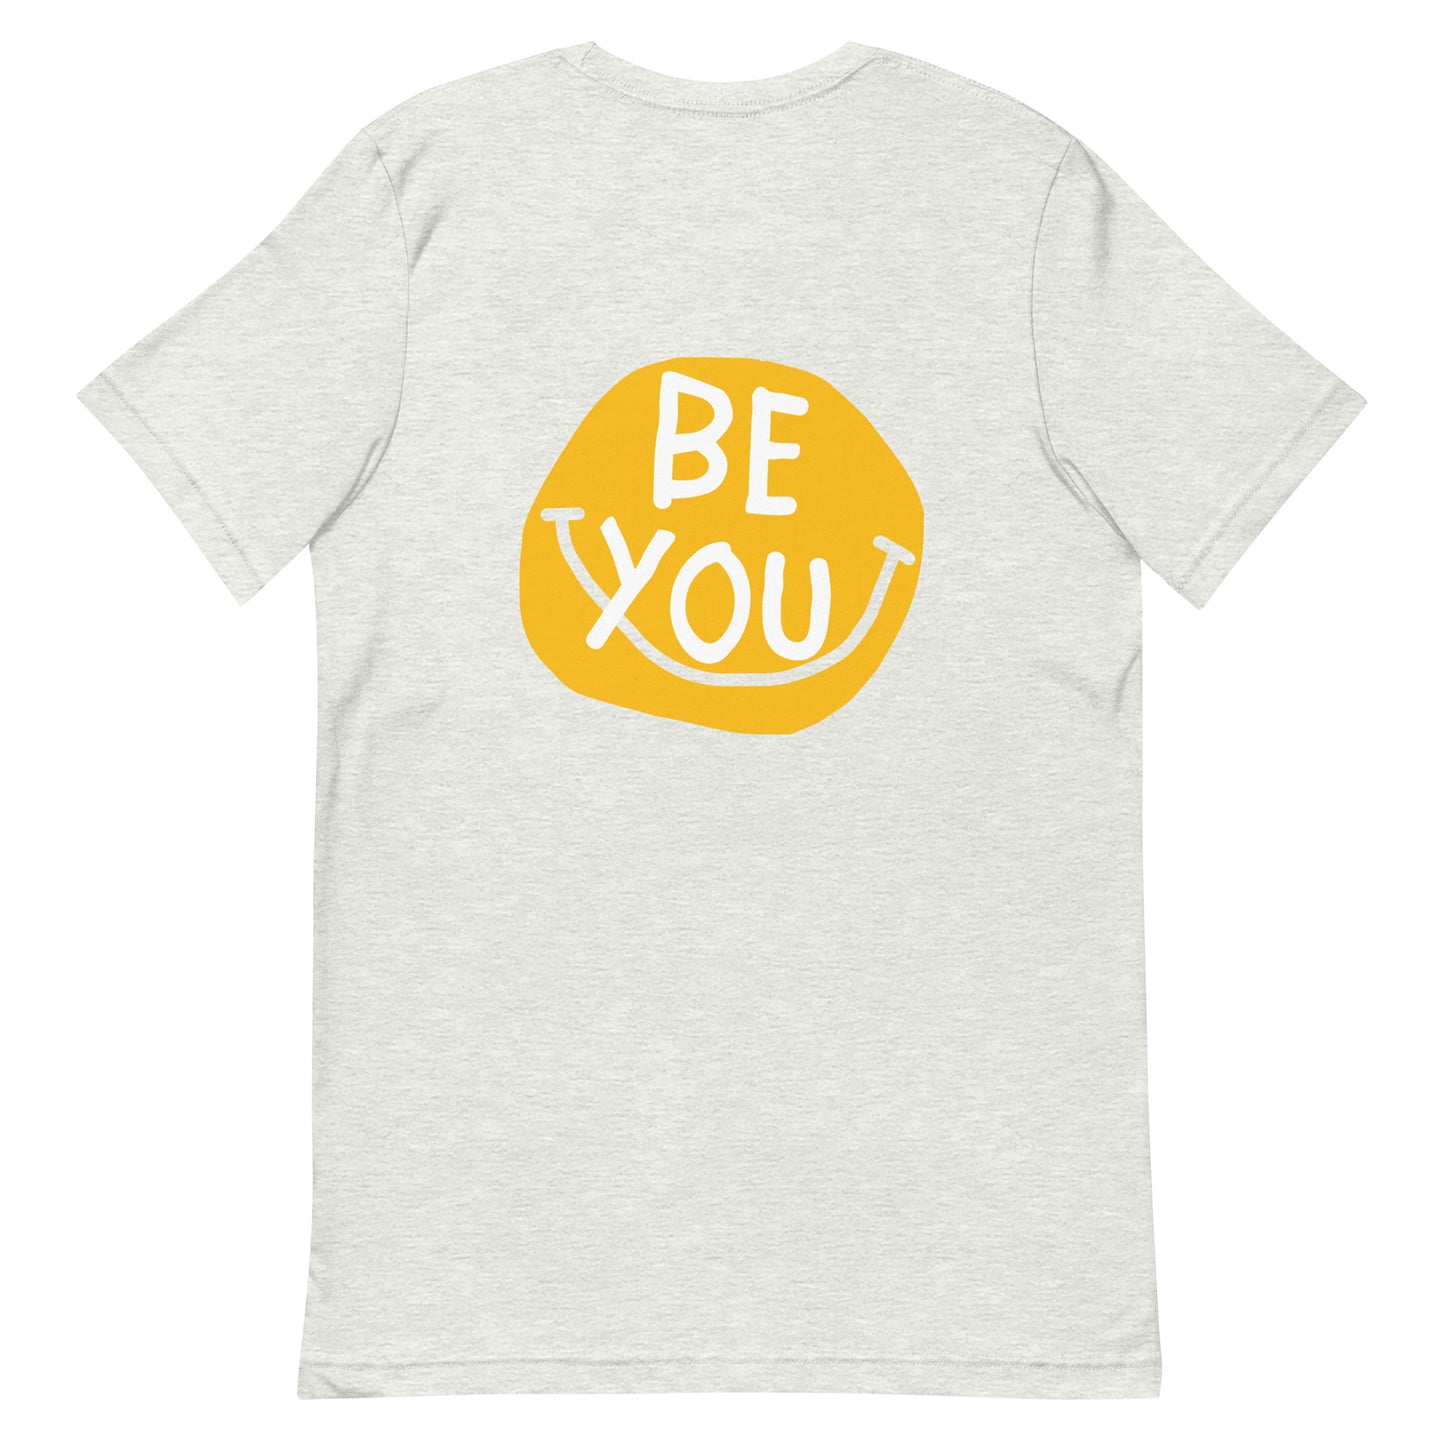 Be You Tee (7 Colors)